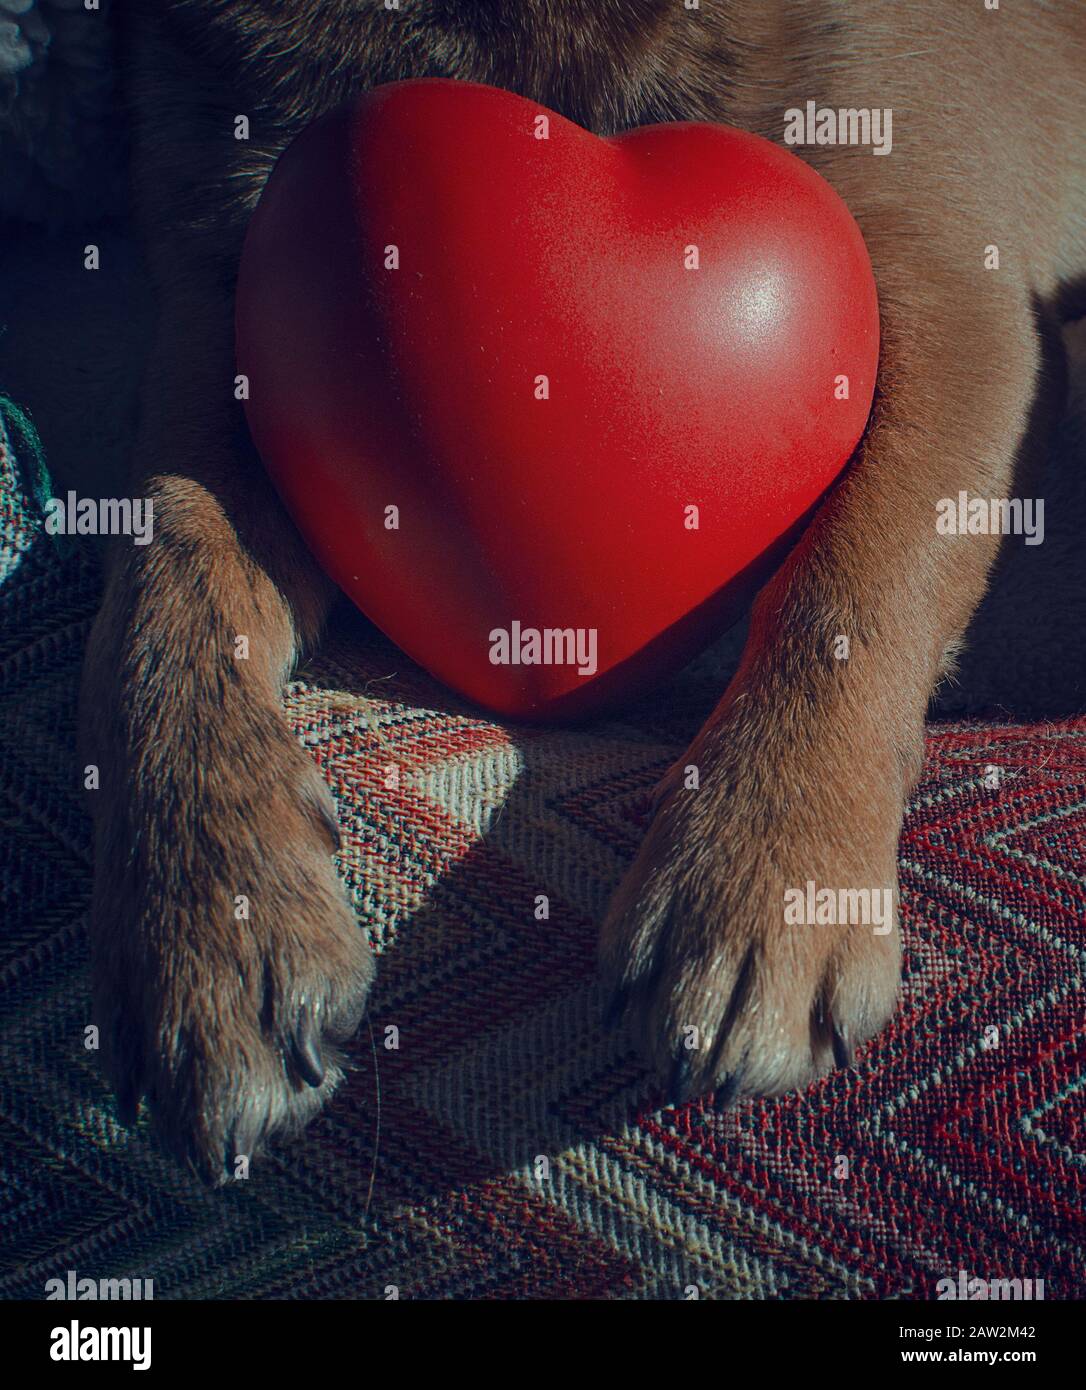 Doggy Valentine's Day. Closeup of the paws of a chihuahua holding a heart-shaped toy. Stock Photo